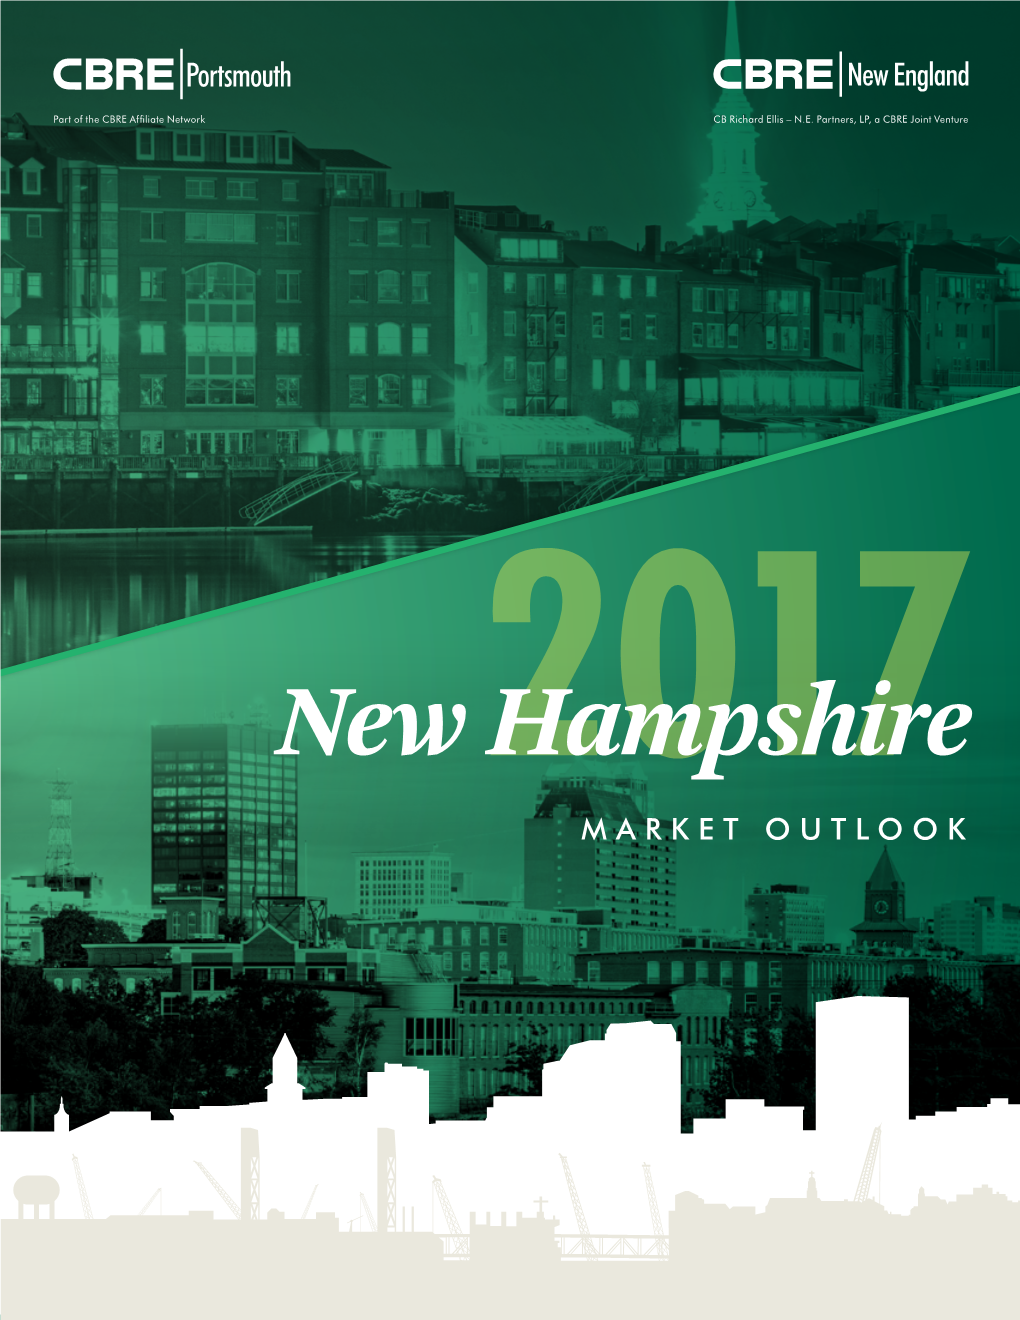 New Hampshire MARKET OUTLOOK a MESSAGE from CBRE/NEW ENGLAND